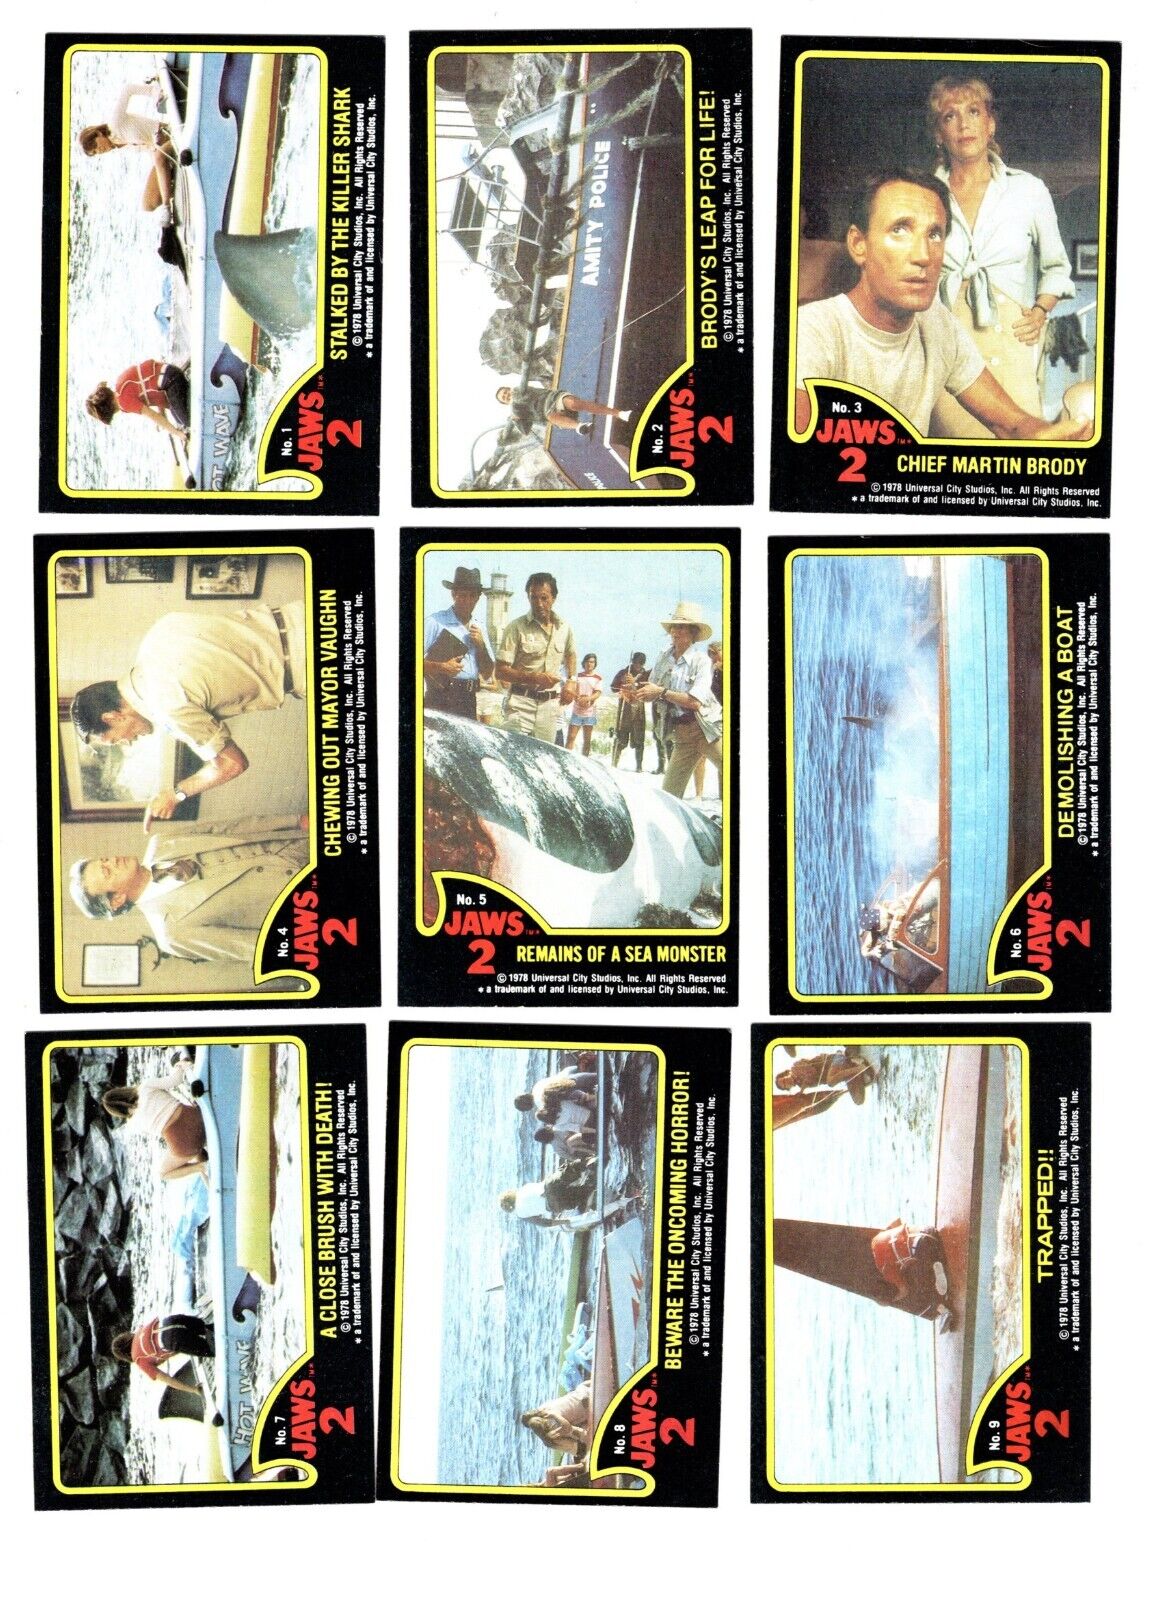 1978 TOPPS JAWS 2 THE MOVIE TRADING CARD SET 59-CARDS NM/MINT ALL CARDS SCANNED